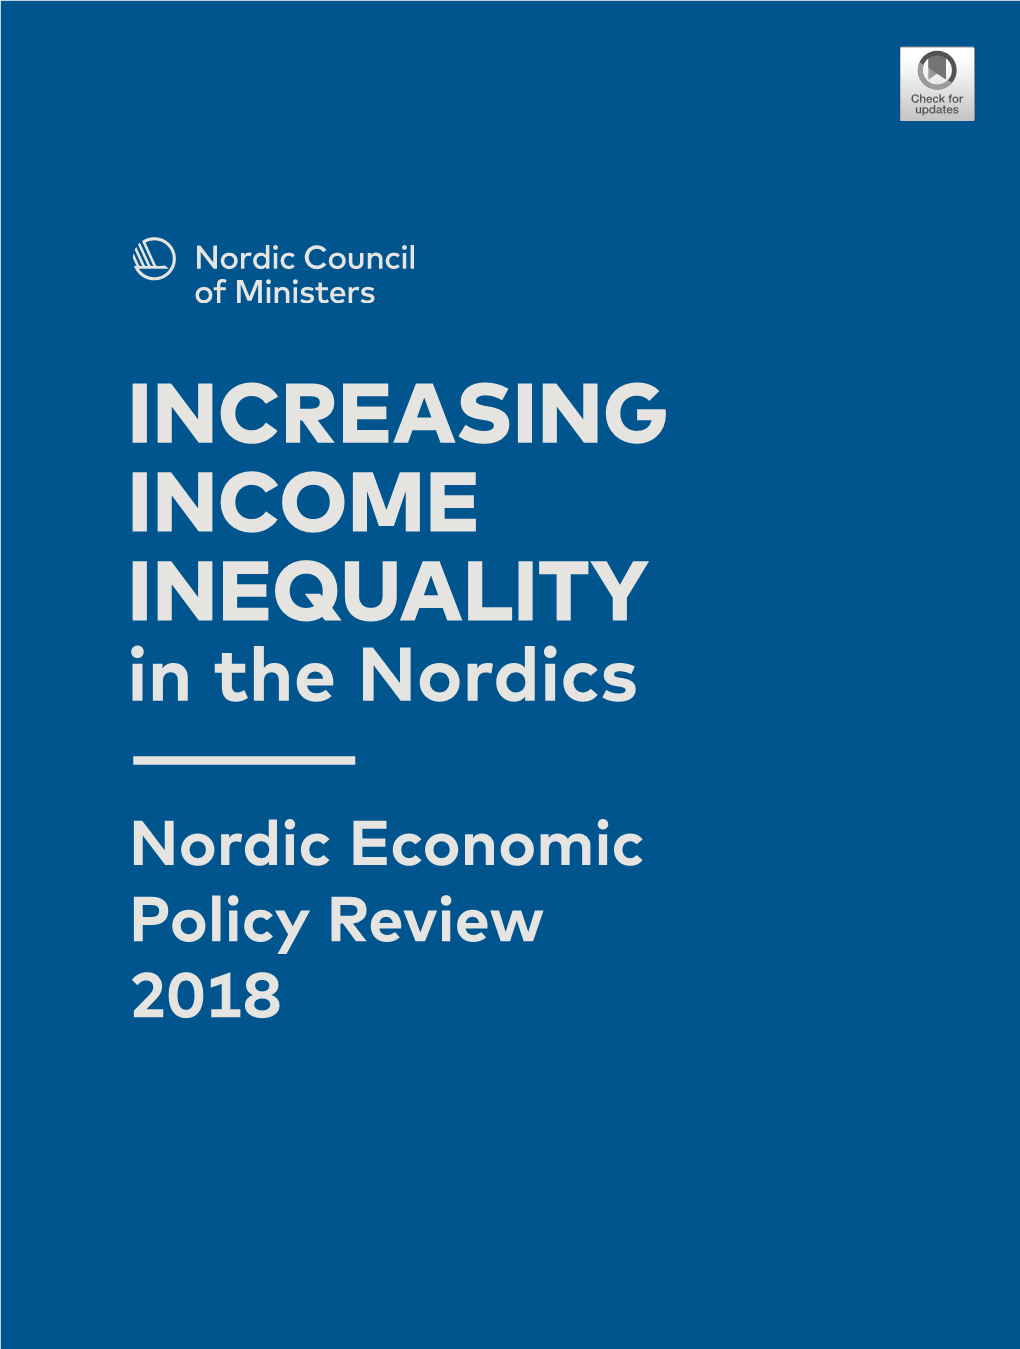 INCREASING INCOME INEQUALITY in the Nordics